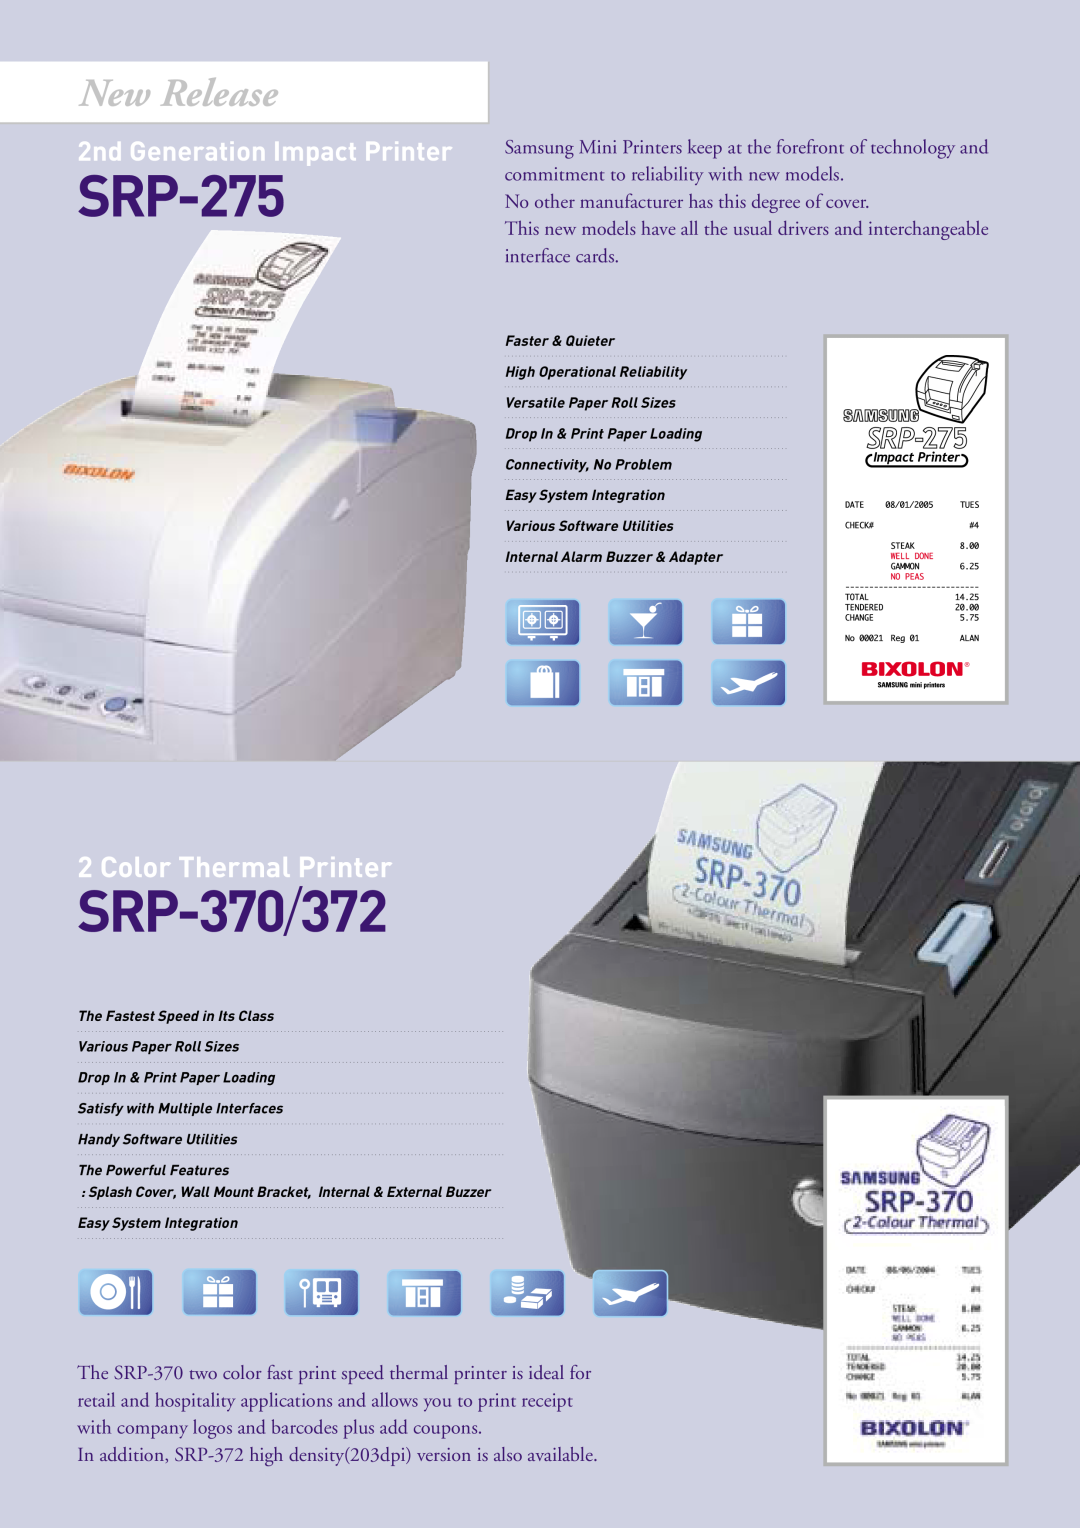 Samsung SRP-372 manual SRP-275, SRP-370/372, New Release, Color Thermal Printer, 2nd Generation Impact Printer 